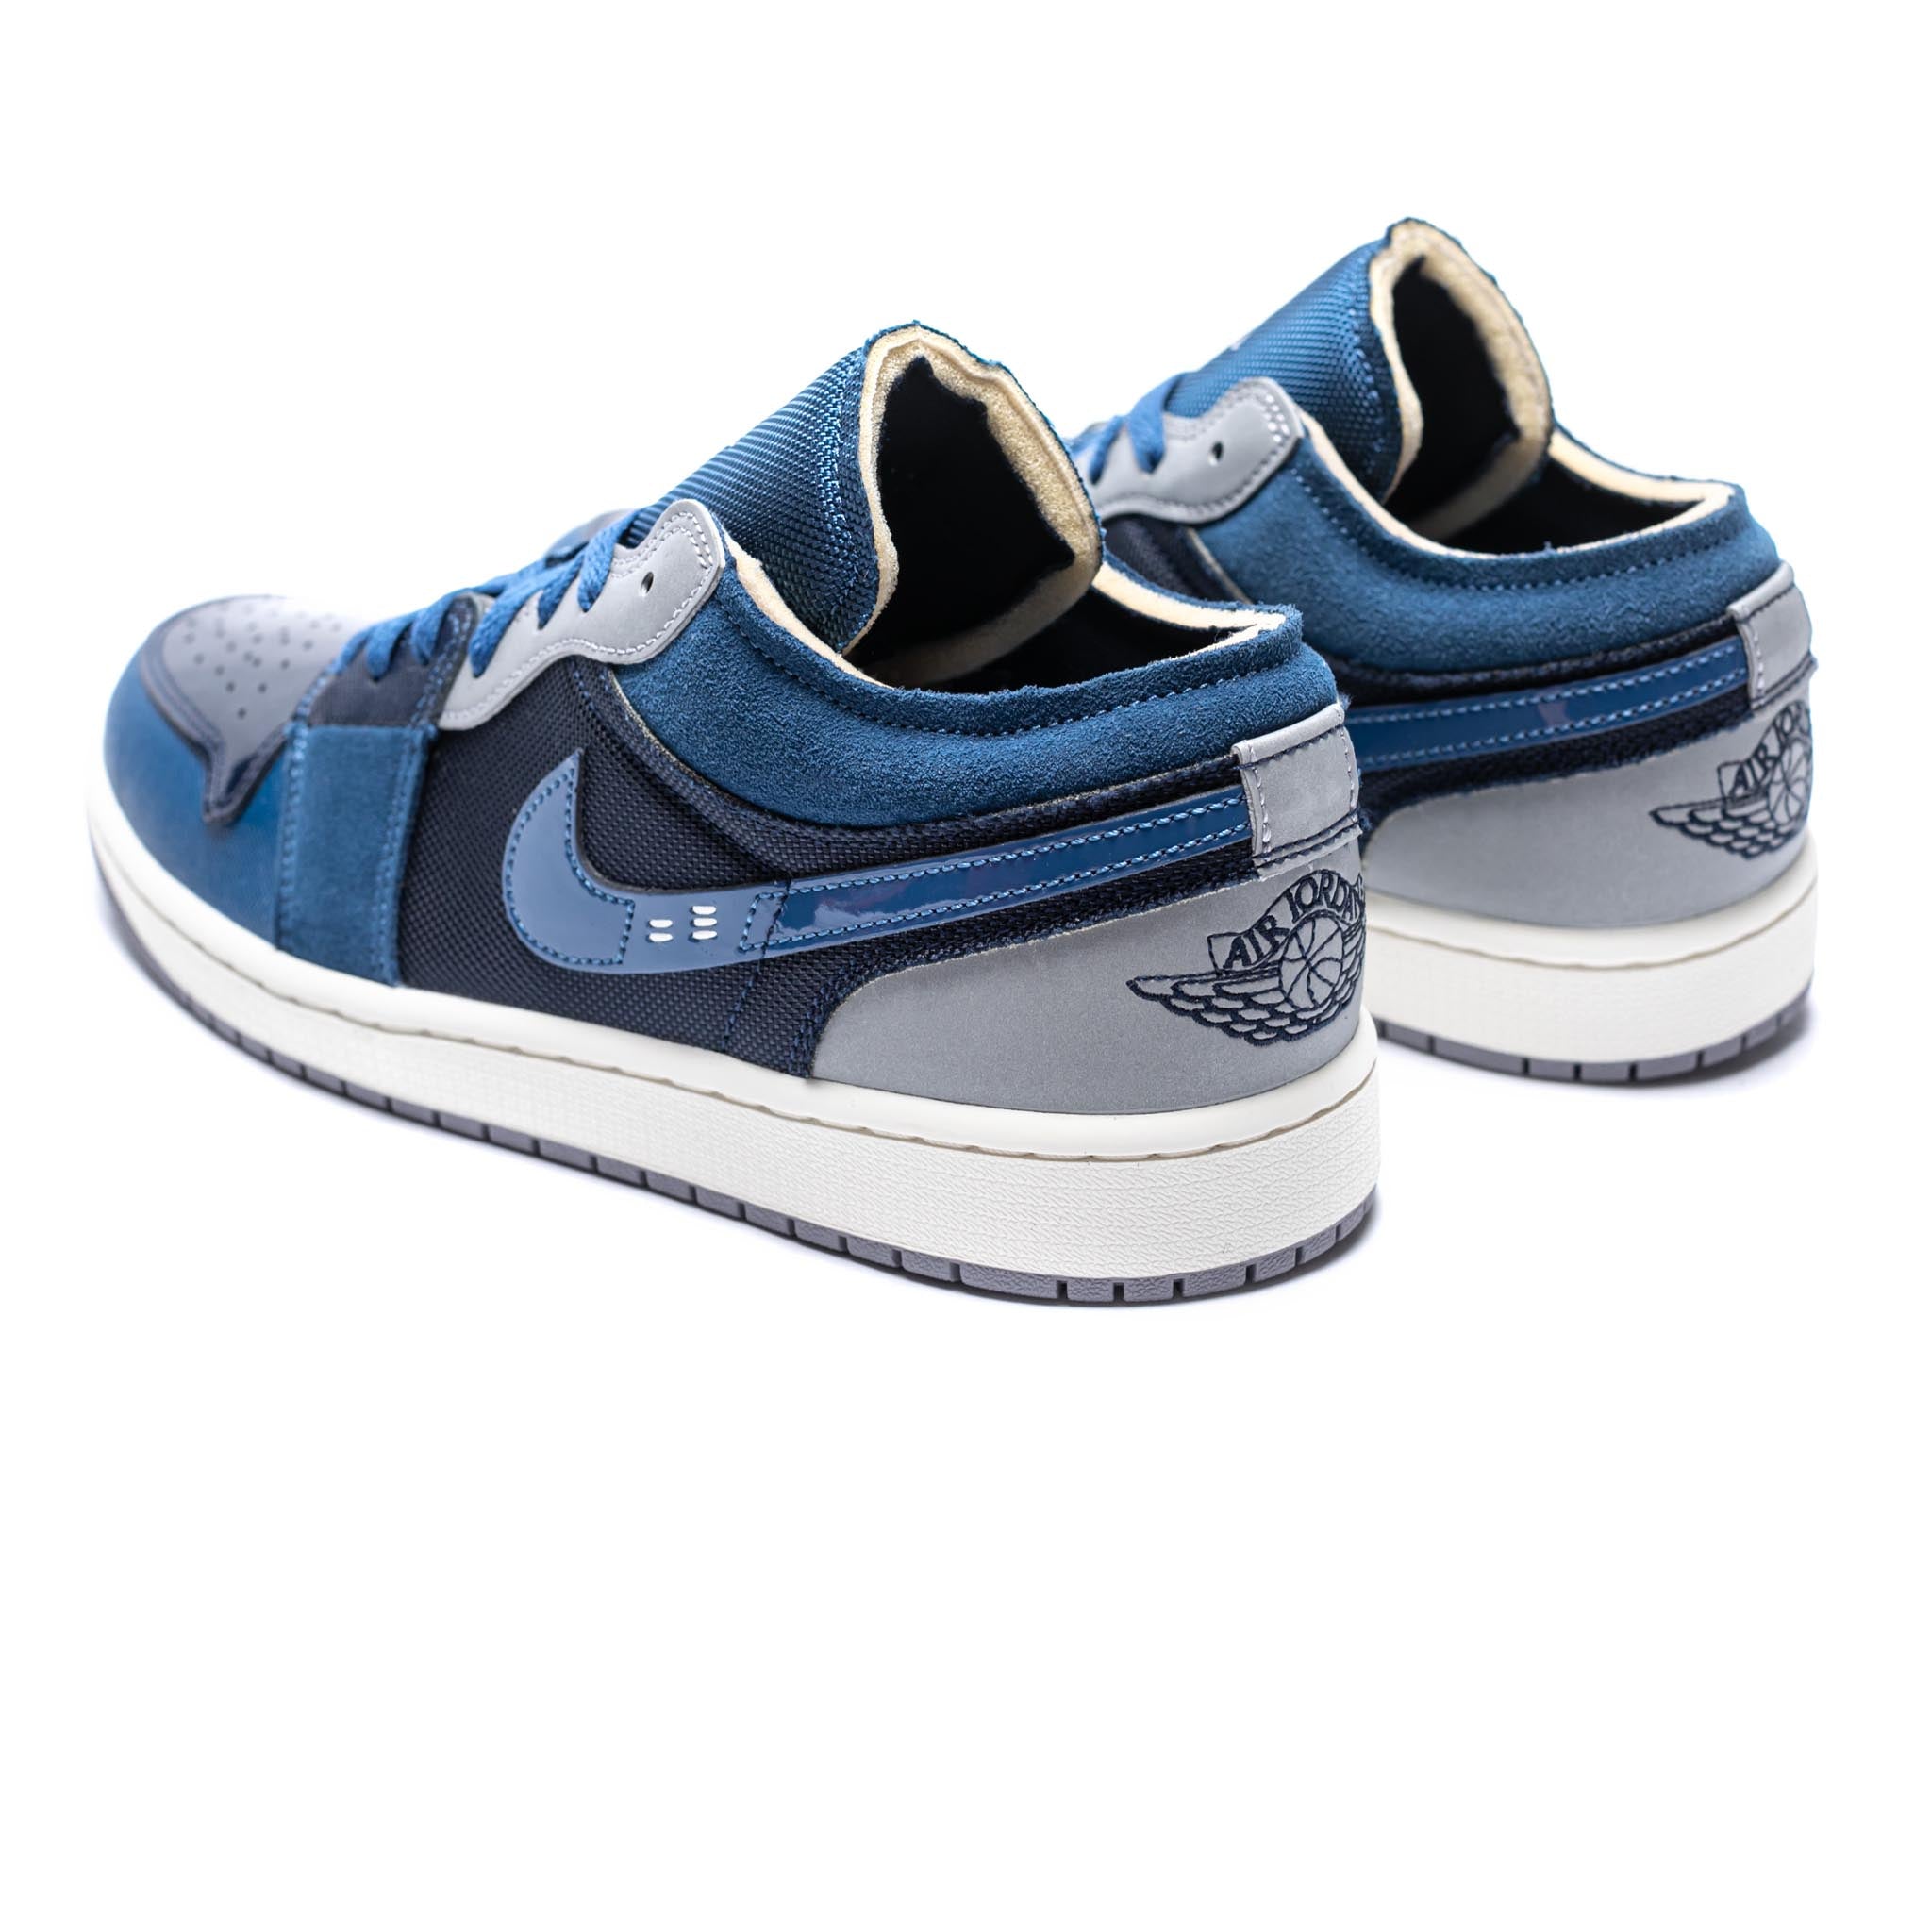 Air Jordan 1 Low SE Craft 'Inside Out' Obsidian/French Blue